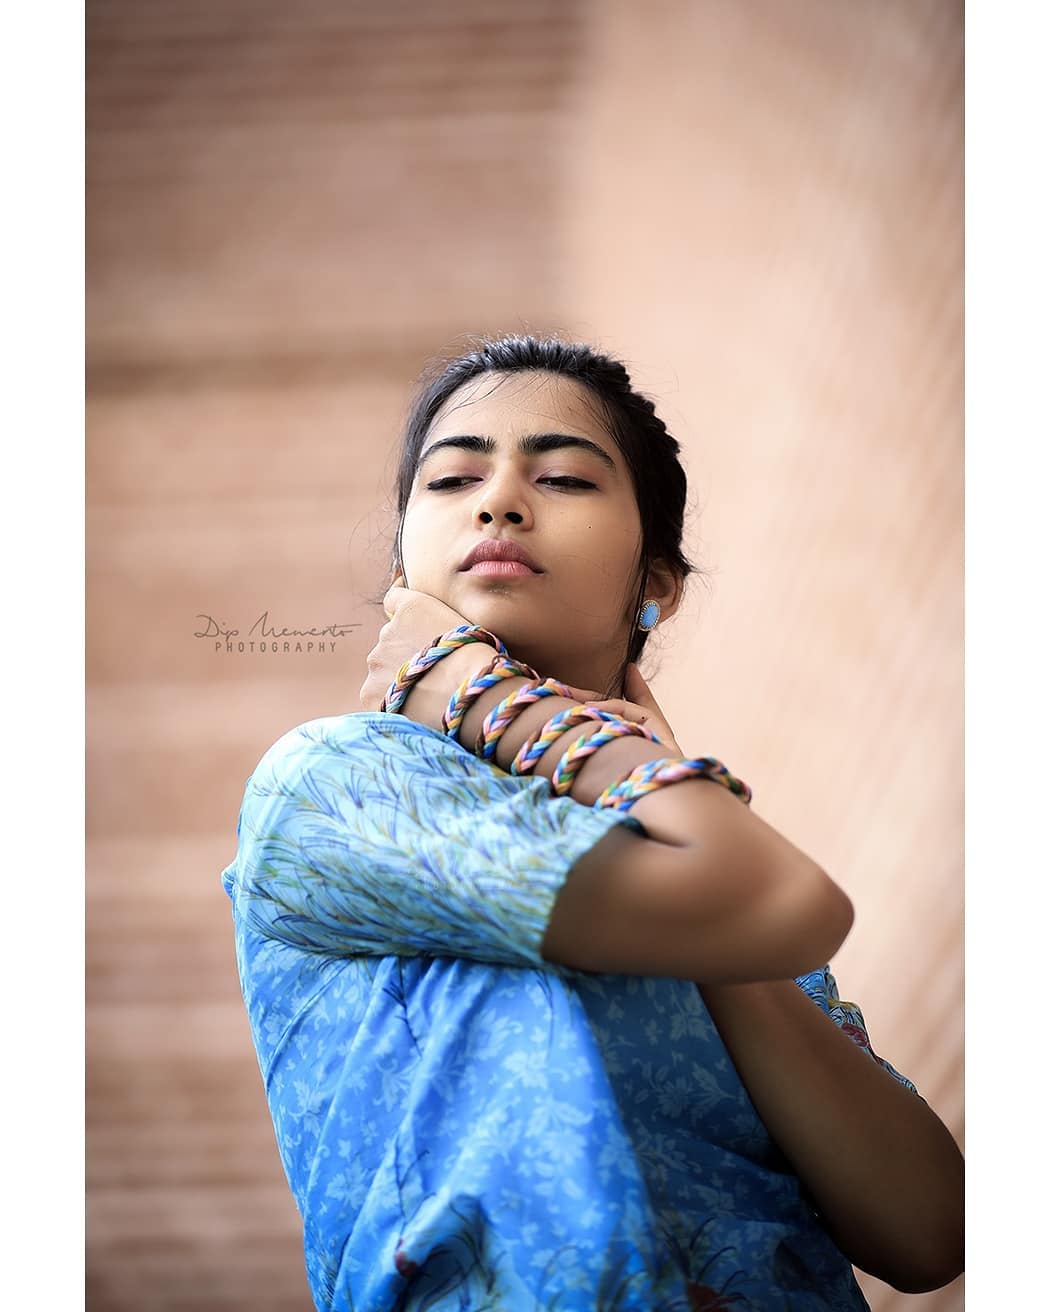 Do something today that your future self will thank you for..
.
_._._._._._._._._._._._._._._._._._._._.
PC 📸:- @dip_memento_photography
In Frame:- @komalpatel_16 
Garments:- craftartale
#CANON Mark iv + #Godox HSS
_._._._._._._._._._._._._._._._._._._._.
 Follow @dip_memento_photography
-_-_-_-_-_-_-_-_-_-_-_-_-_-_-_-_-_-_
All rights and credits reserved to the respective owner(s)
.
.
FASHION PHOTOGRAPHY
FASHION PORTFOLIOS
MODEL PHOTOGRAPHY
DM FOR SHOOTS, COLLAB PARTNERSHIP.
.
.
#endlessfaces #igpodium_portraits #shutterstock #pixel_ig #pixelart  #theportraitpr0jectject #womenportrait #photographyislife #photographylovers #portrait_planet #agameoftones #9924227745 #portraitfestival #portraits_ig #garmentshoot #boudoirphotos  #portraitsofficial #portraitpage #dipmementophotography #portrait_mf #portrait_shots #globe_people #moodyports #majestic_people_ #india_undiscovered #portraitstream #portraitvision